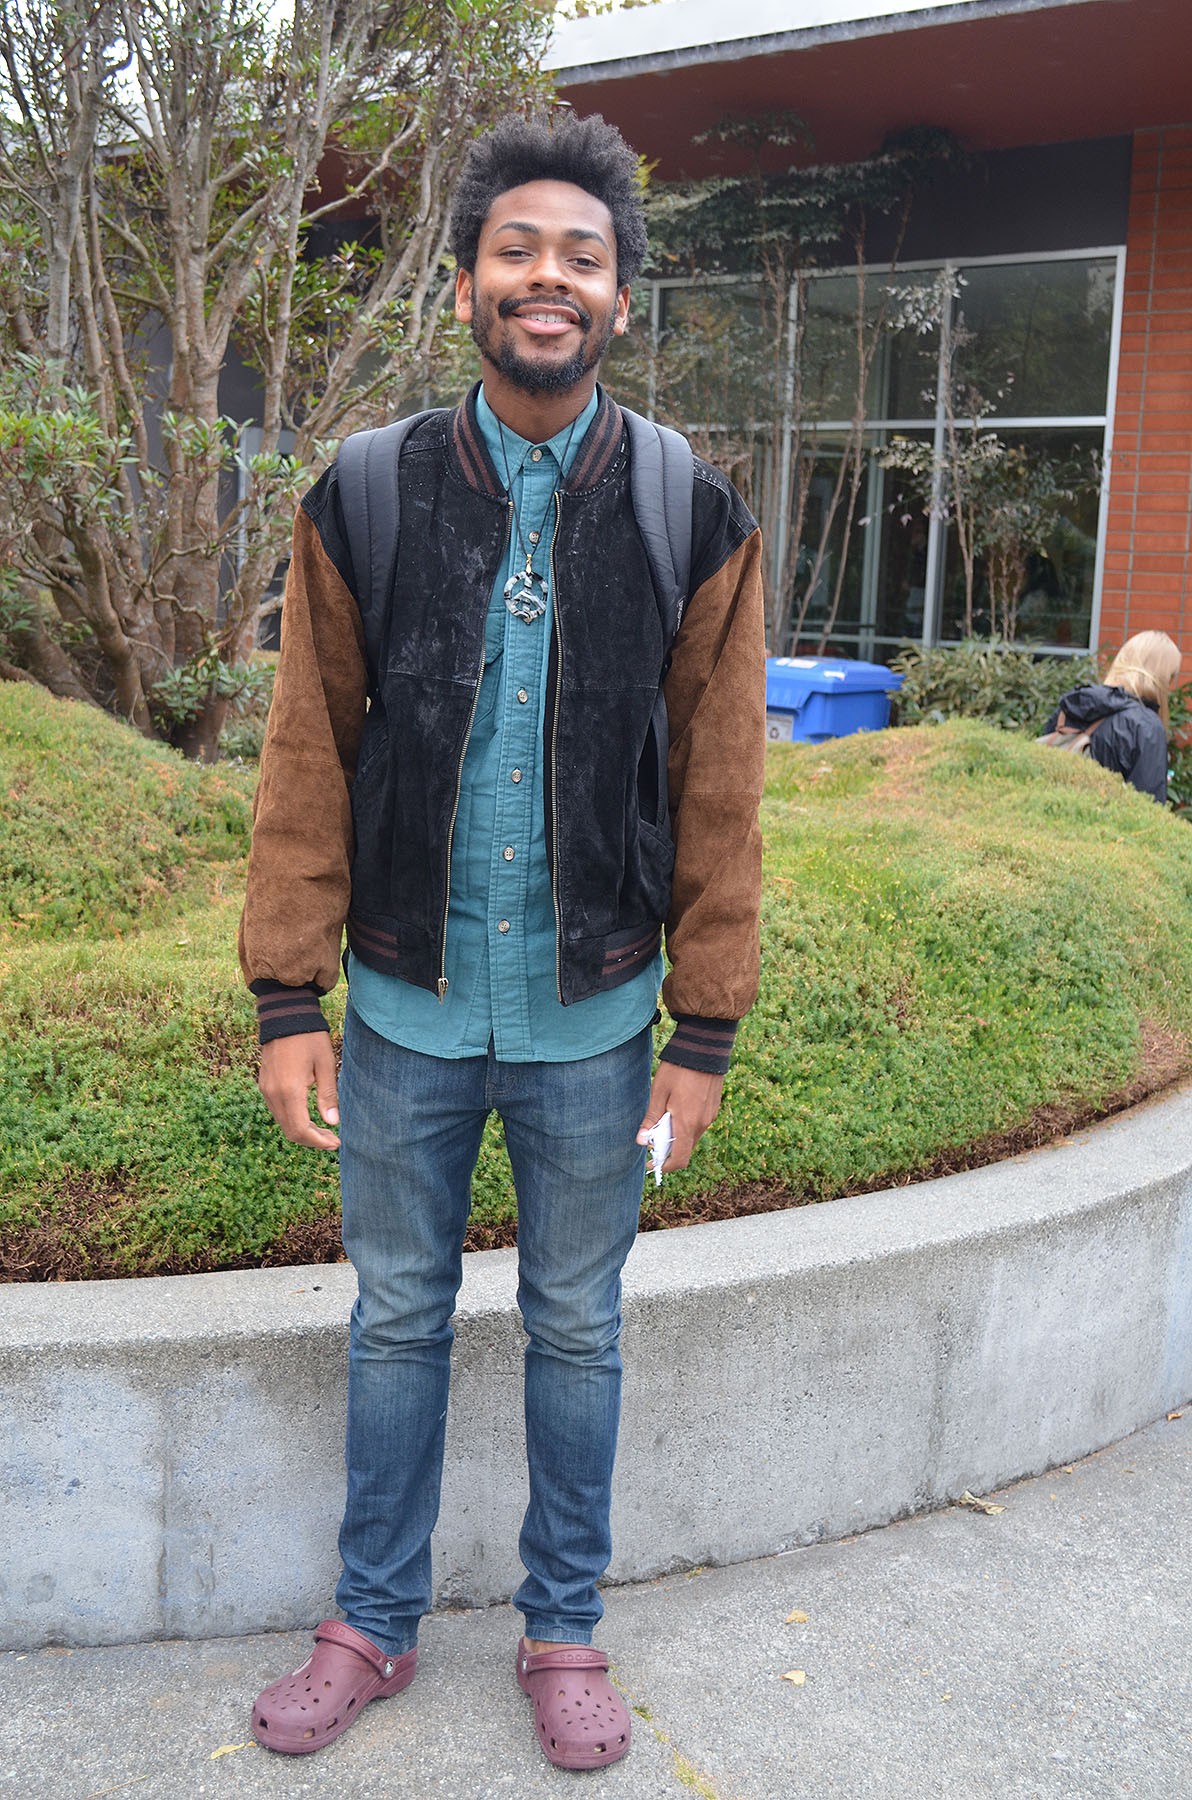 Aaron Green, a junior originally from the Bay area, is enjoying Humboldt after a few years in the hustle and bustle of New York for a couple of years. He's studying biology, but making history as the first man to pull off Crocs. - PHOTO BY SHARON RUCHTE